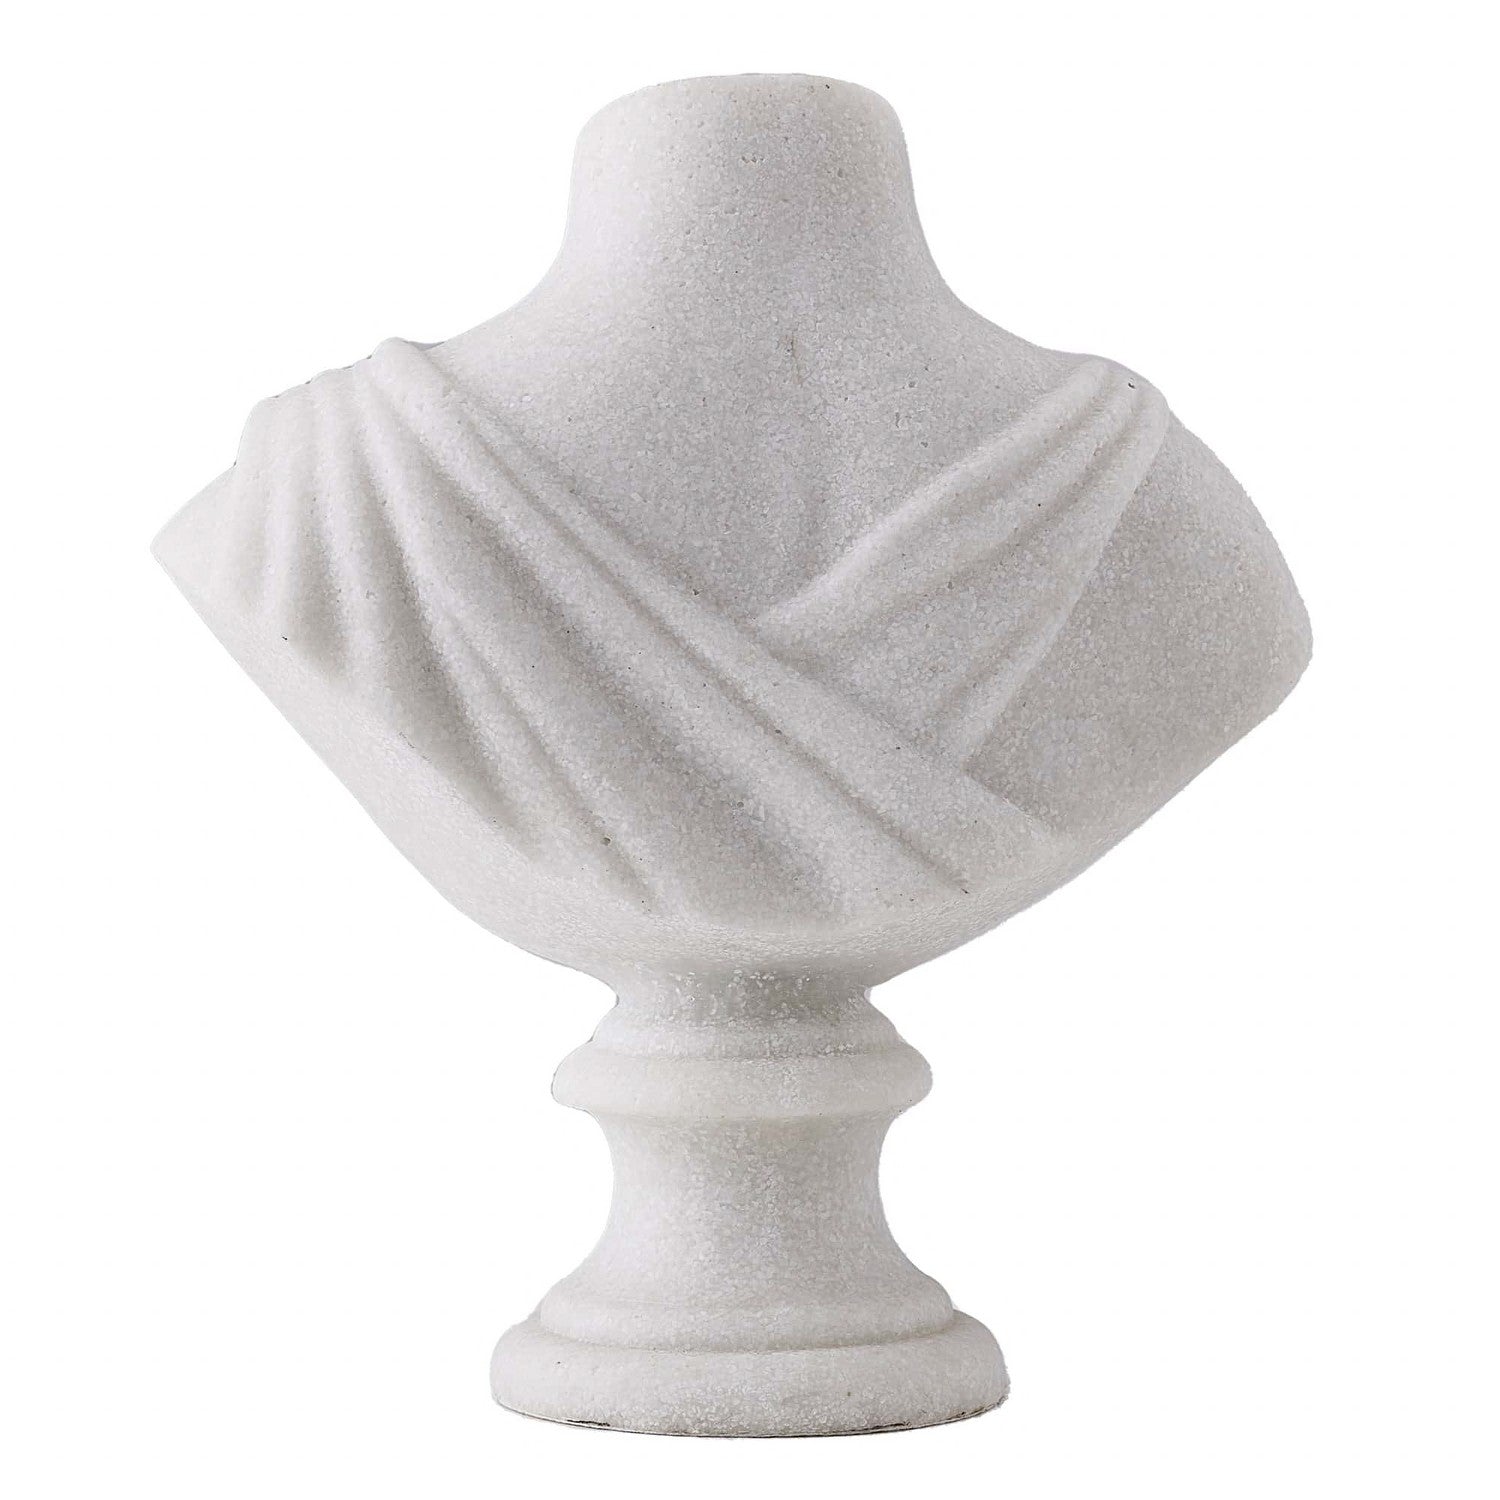 Sculpture from the Virtue collection in Ivory finish